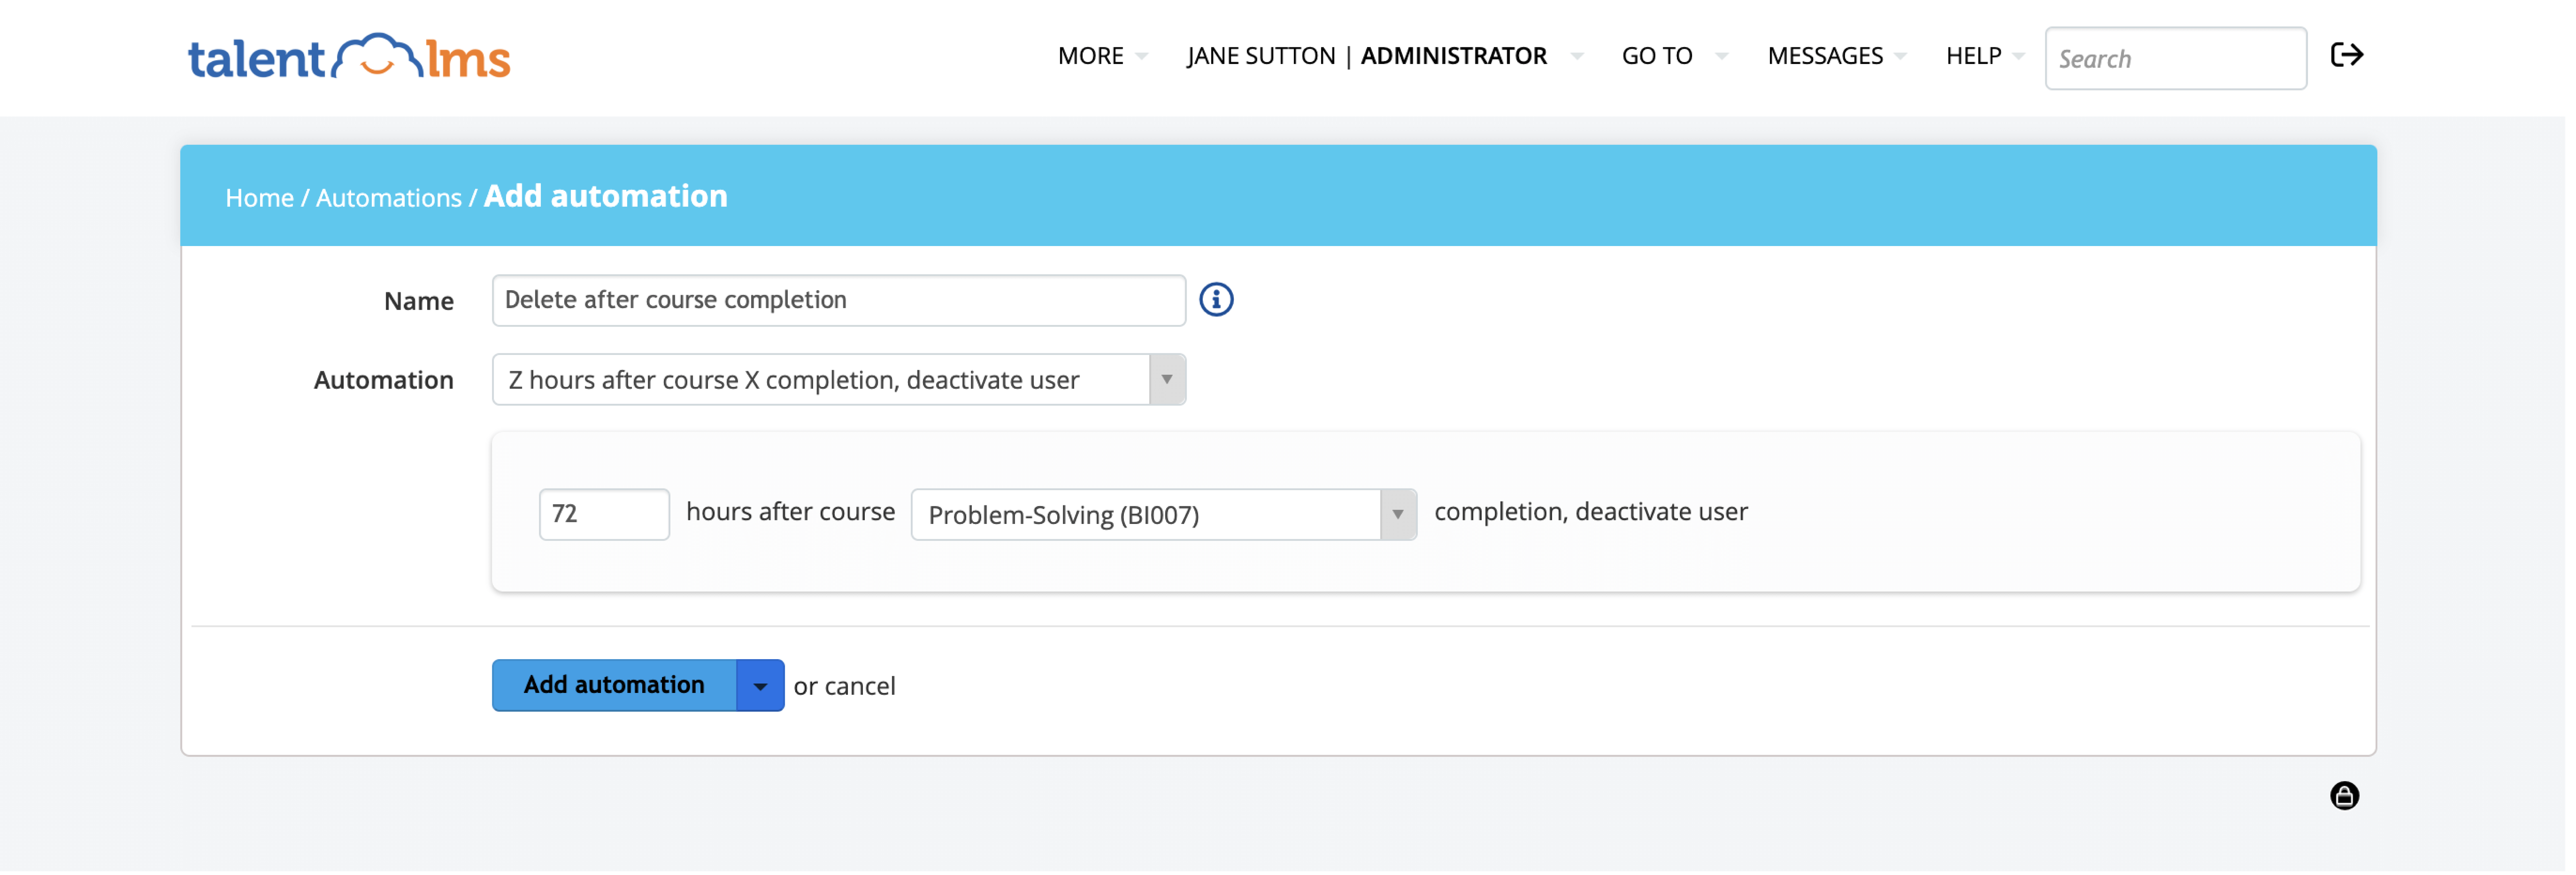 TalentLMS automations: Deactivate user after course completion example